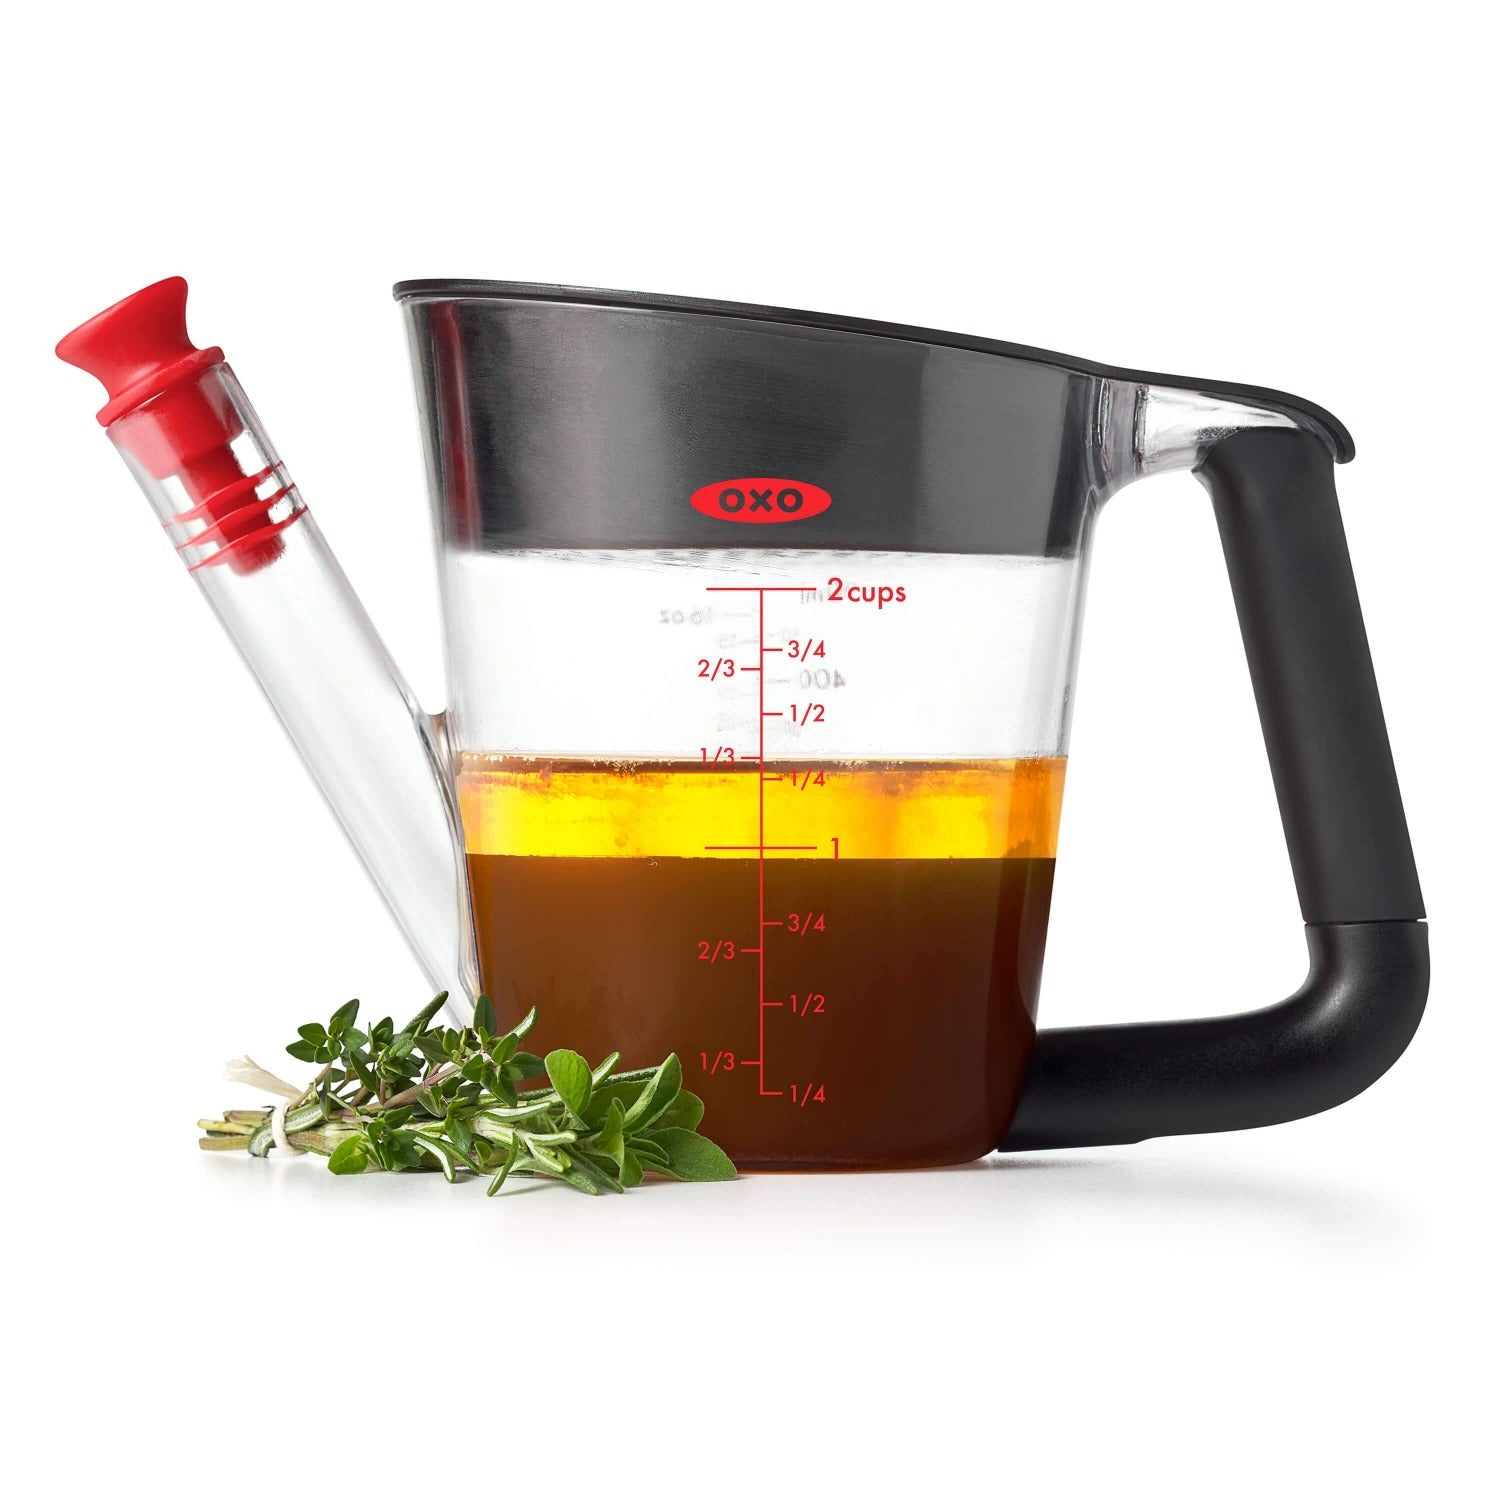 fat seperator 2 cup easy strain and pour oxo